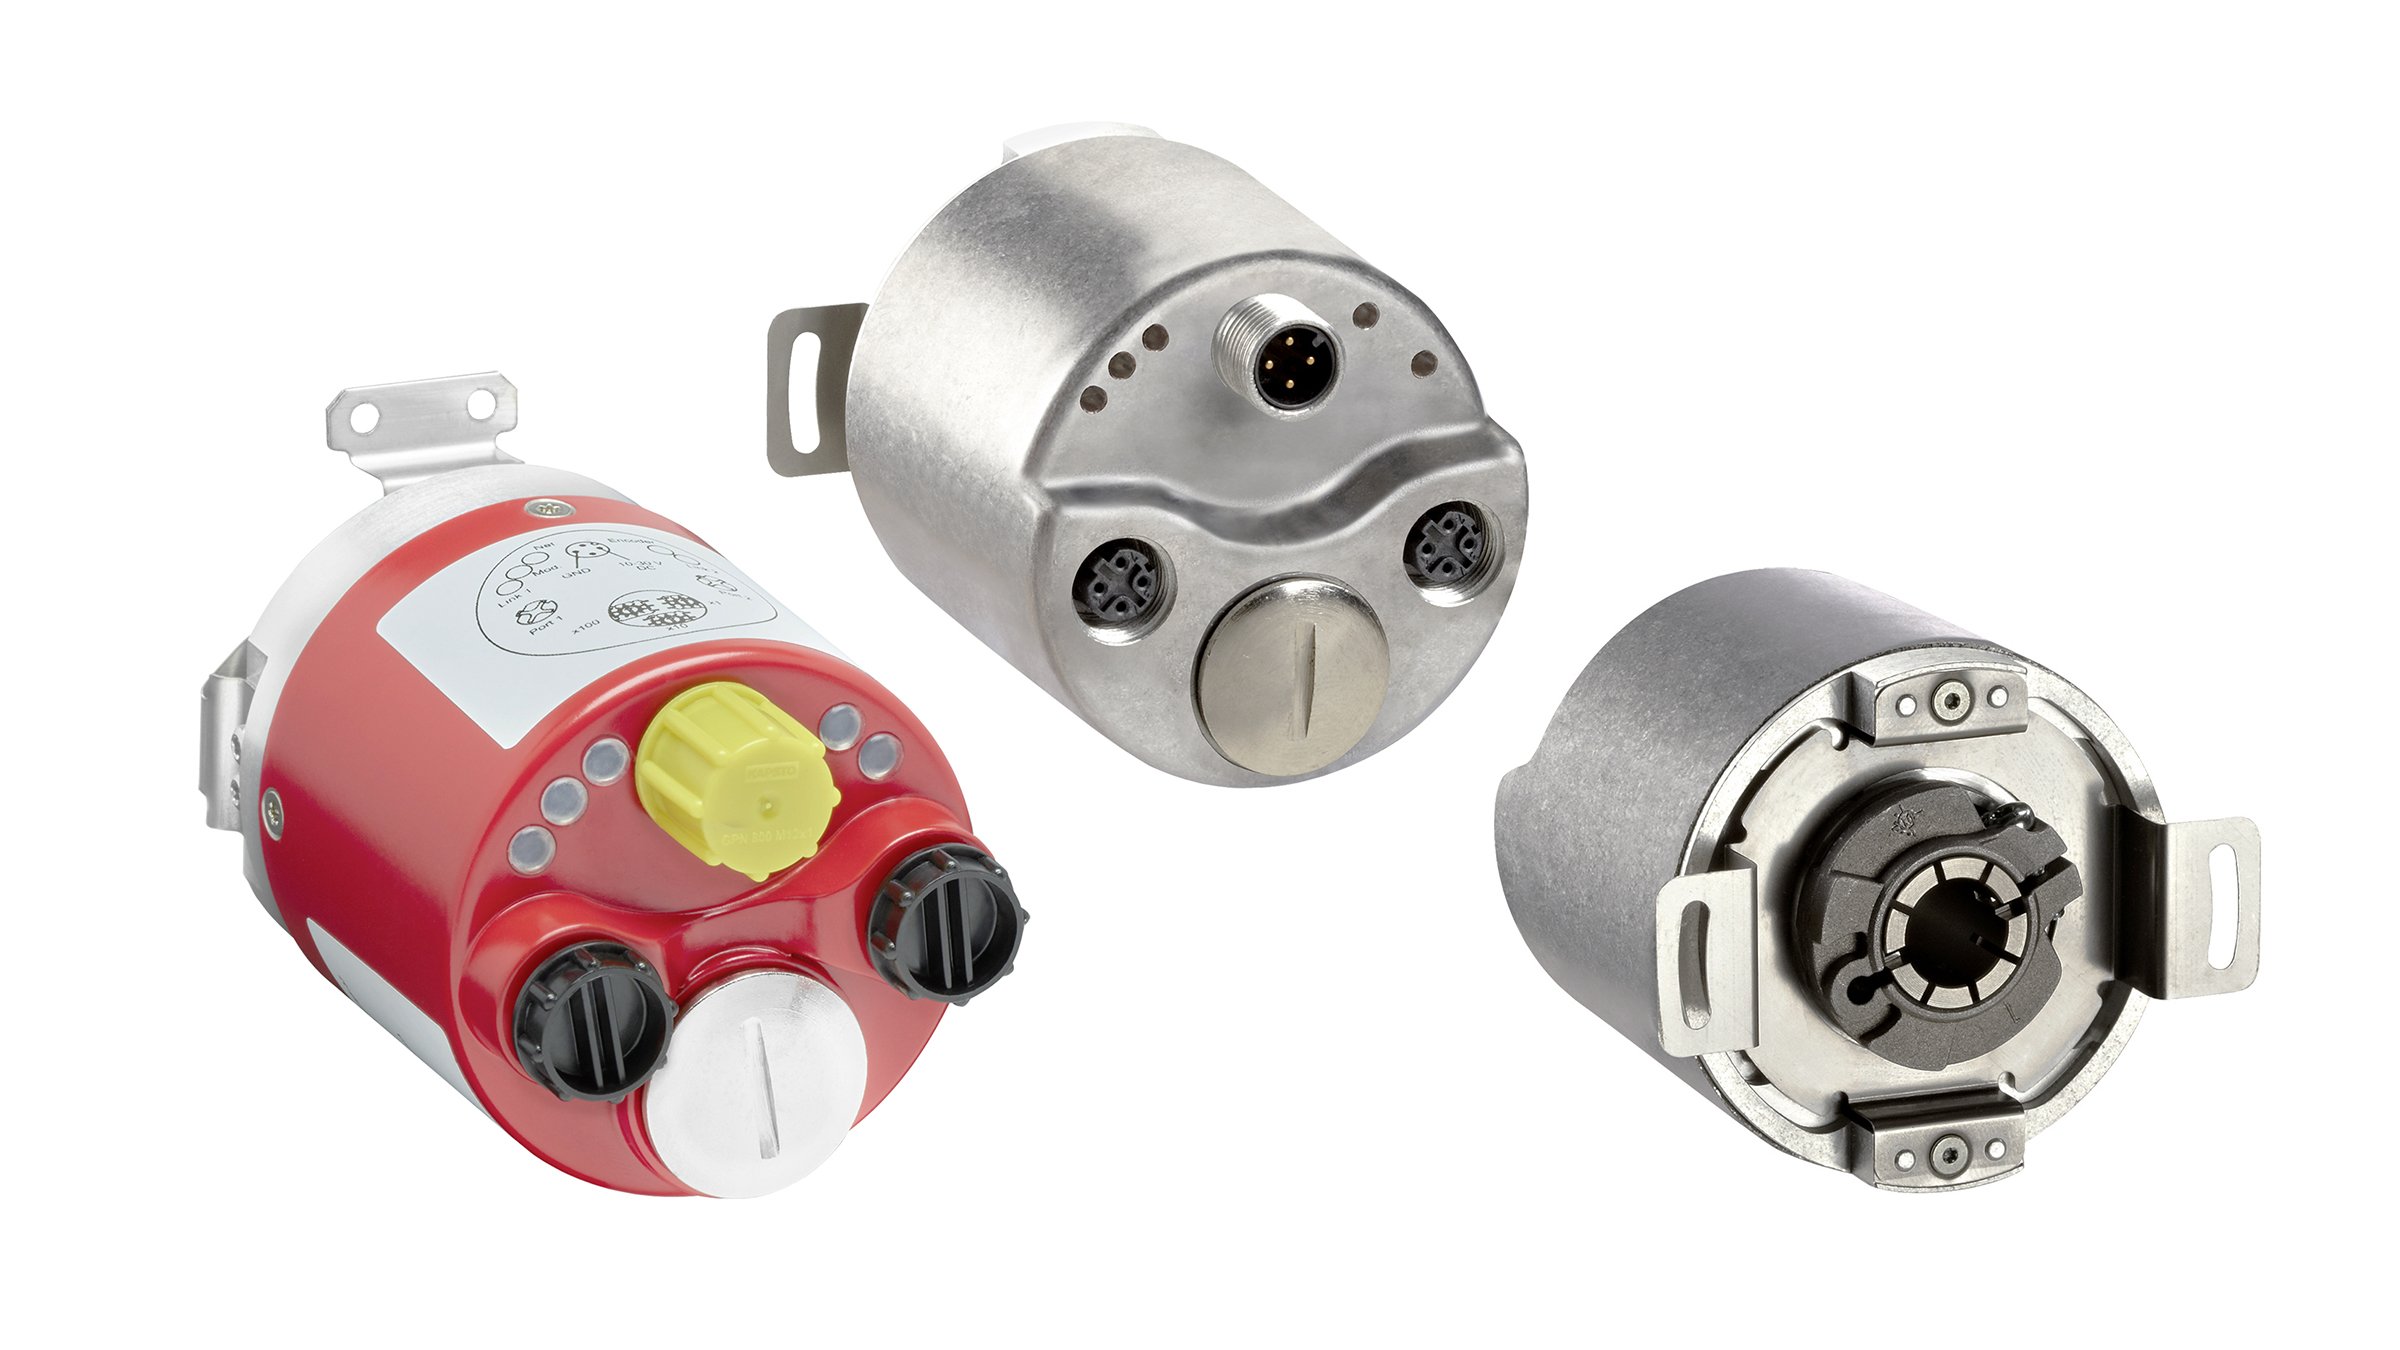 Three  843ES CIP Safety Encoders from top to bottom. Rear view with four connectors; one 12 mm micro male connector (12:00), one with steel conduit cover (6:00), and two 12 mm micro female connectors (3:00 and 9:00). Front view with hollow shaft in the center and mounting brackets at 3:00 and 9:00. Rear view encased in safety red with four connectors; one with yellow plastic cap (12:00), one with steel conduit cover (6:00), and two with plastic black caps (3:00 and 9:00). 